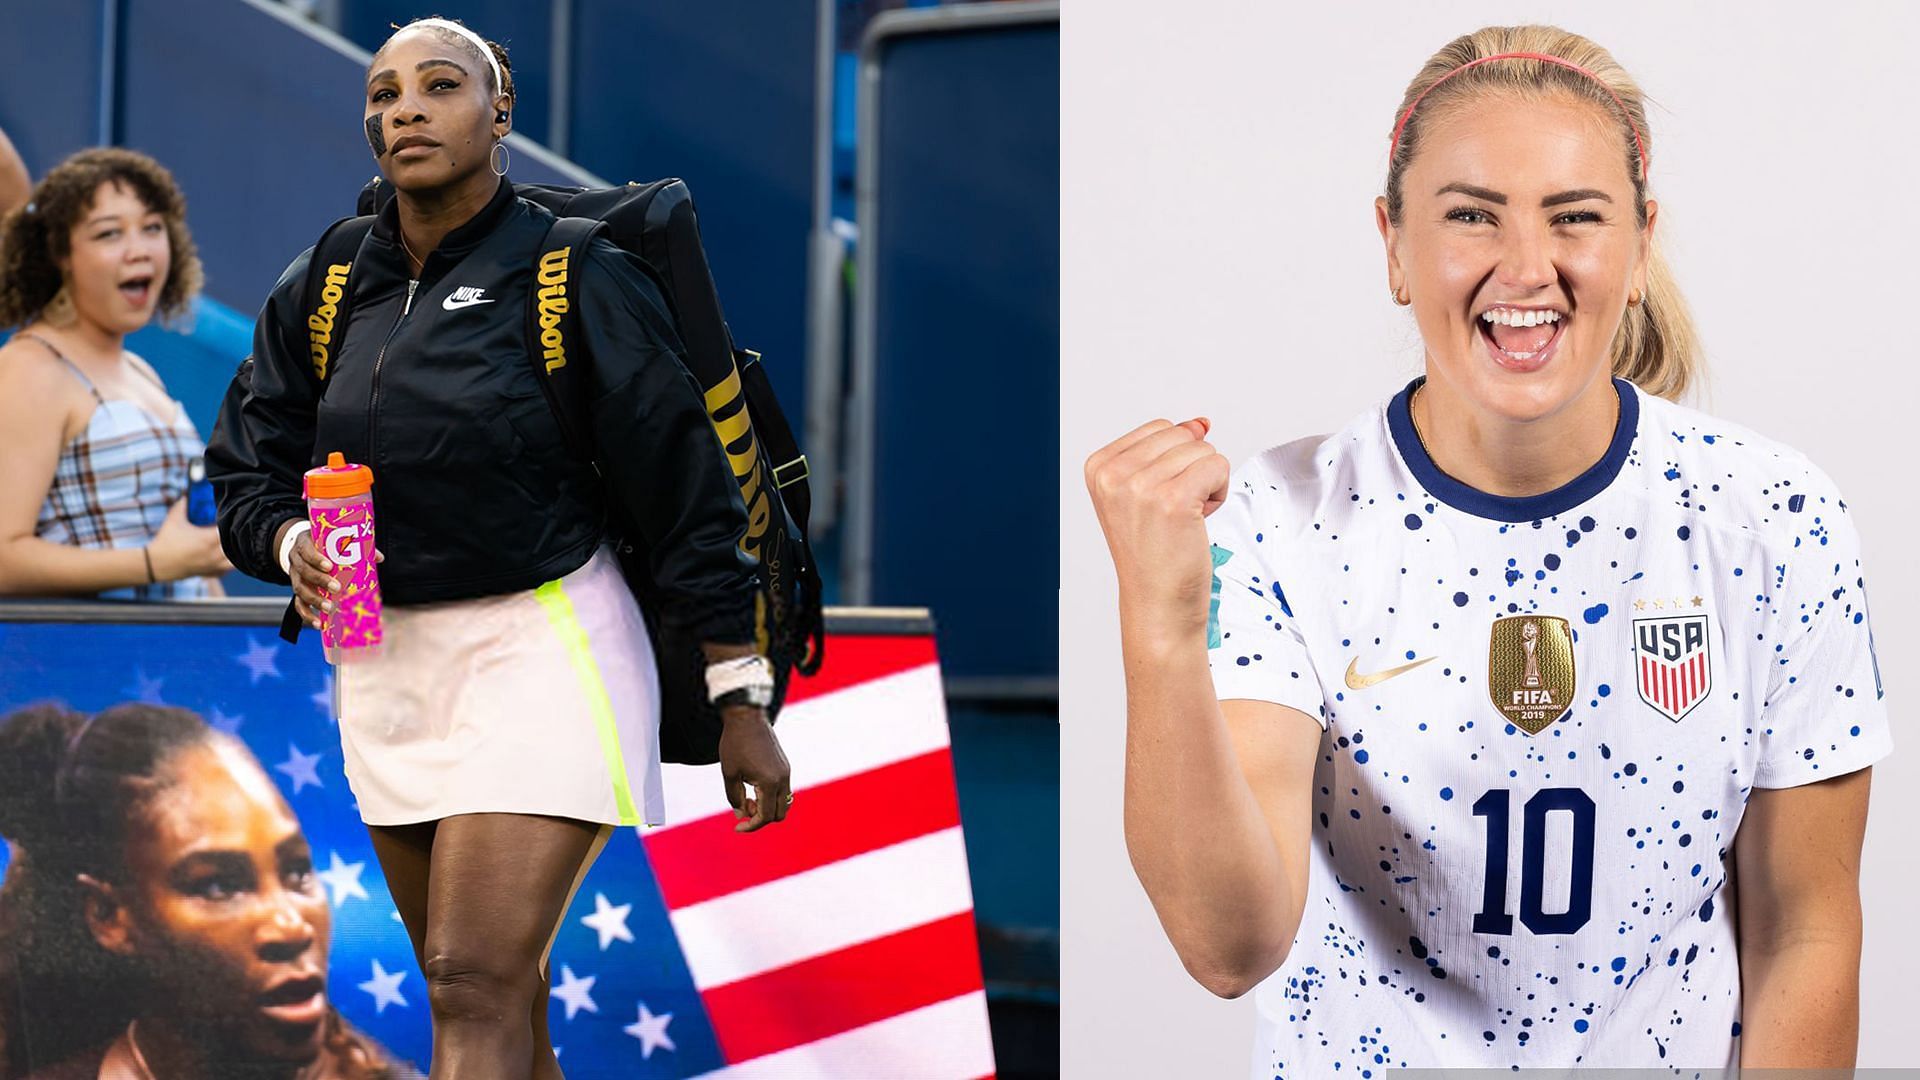 Any time Serena Williams represents Team USA is one of the coolest things in the world - Soccer star Lindsey Horan